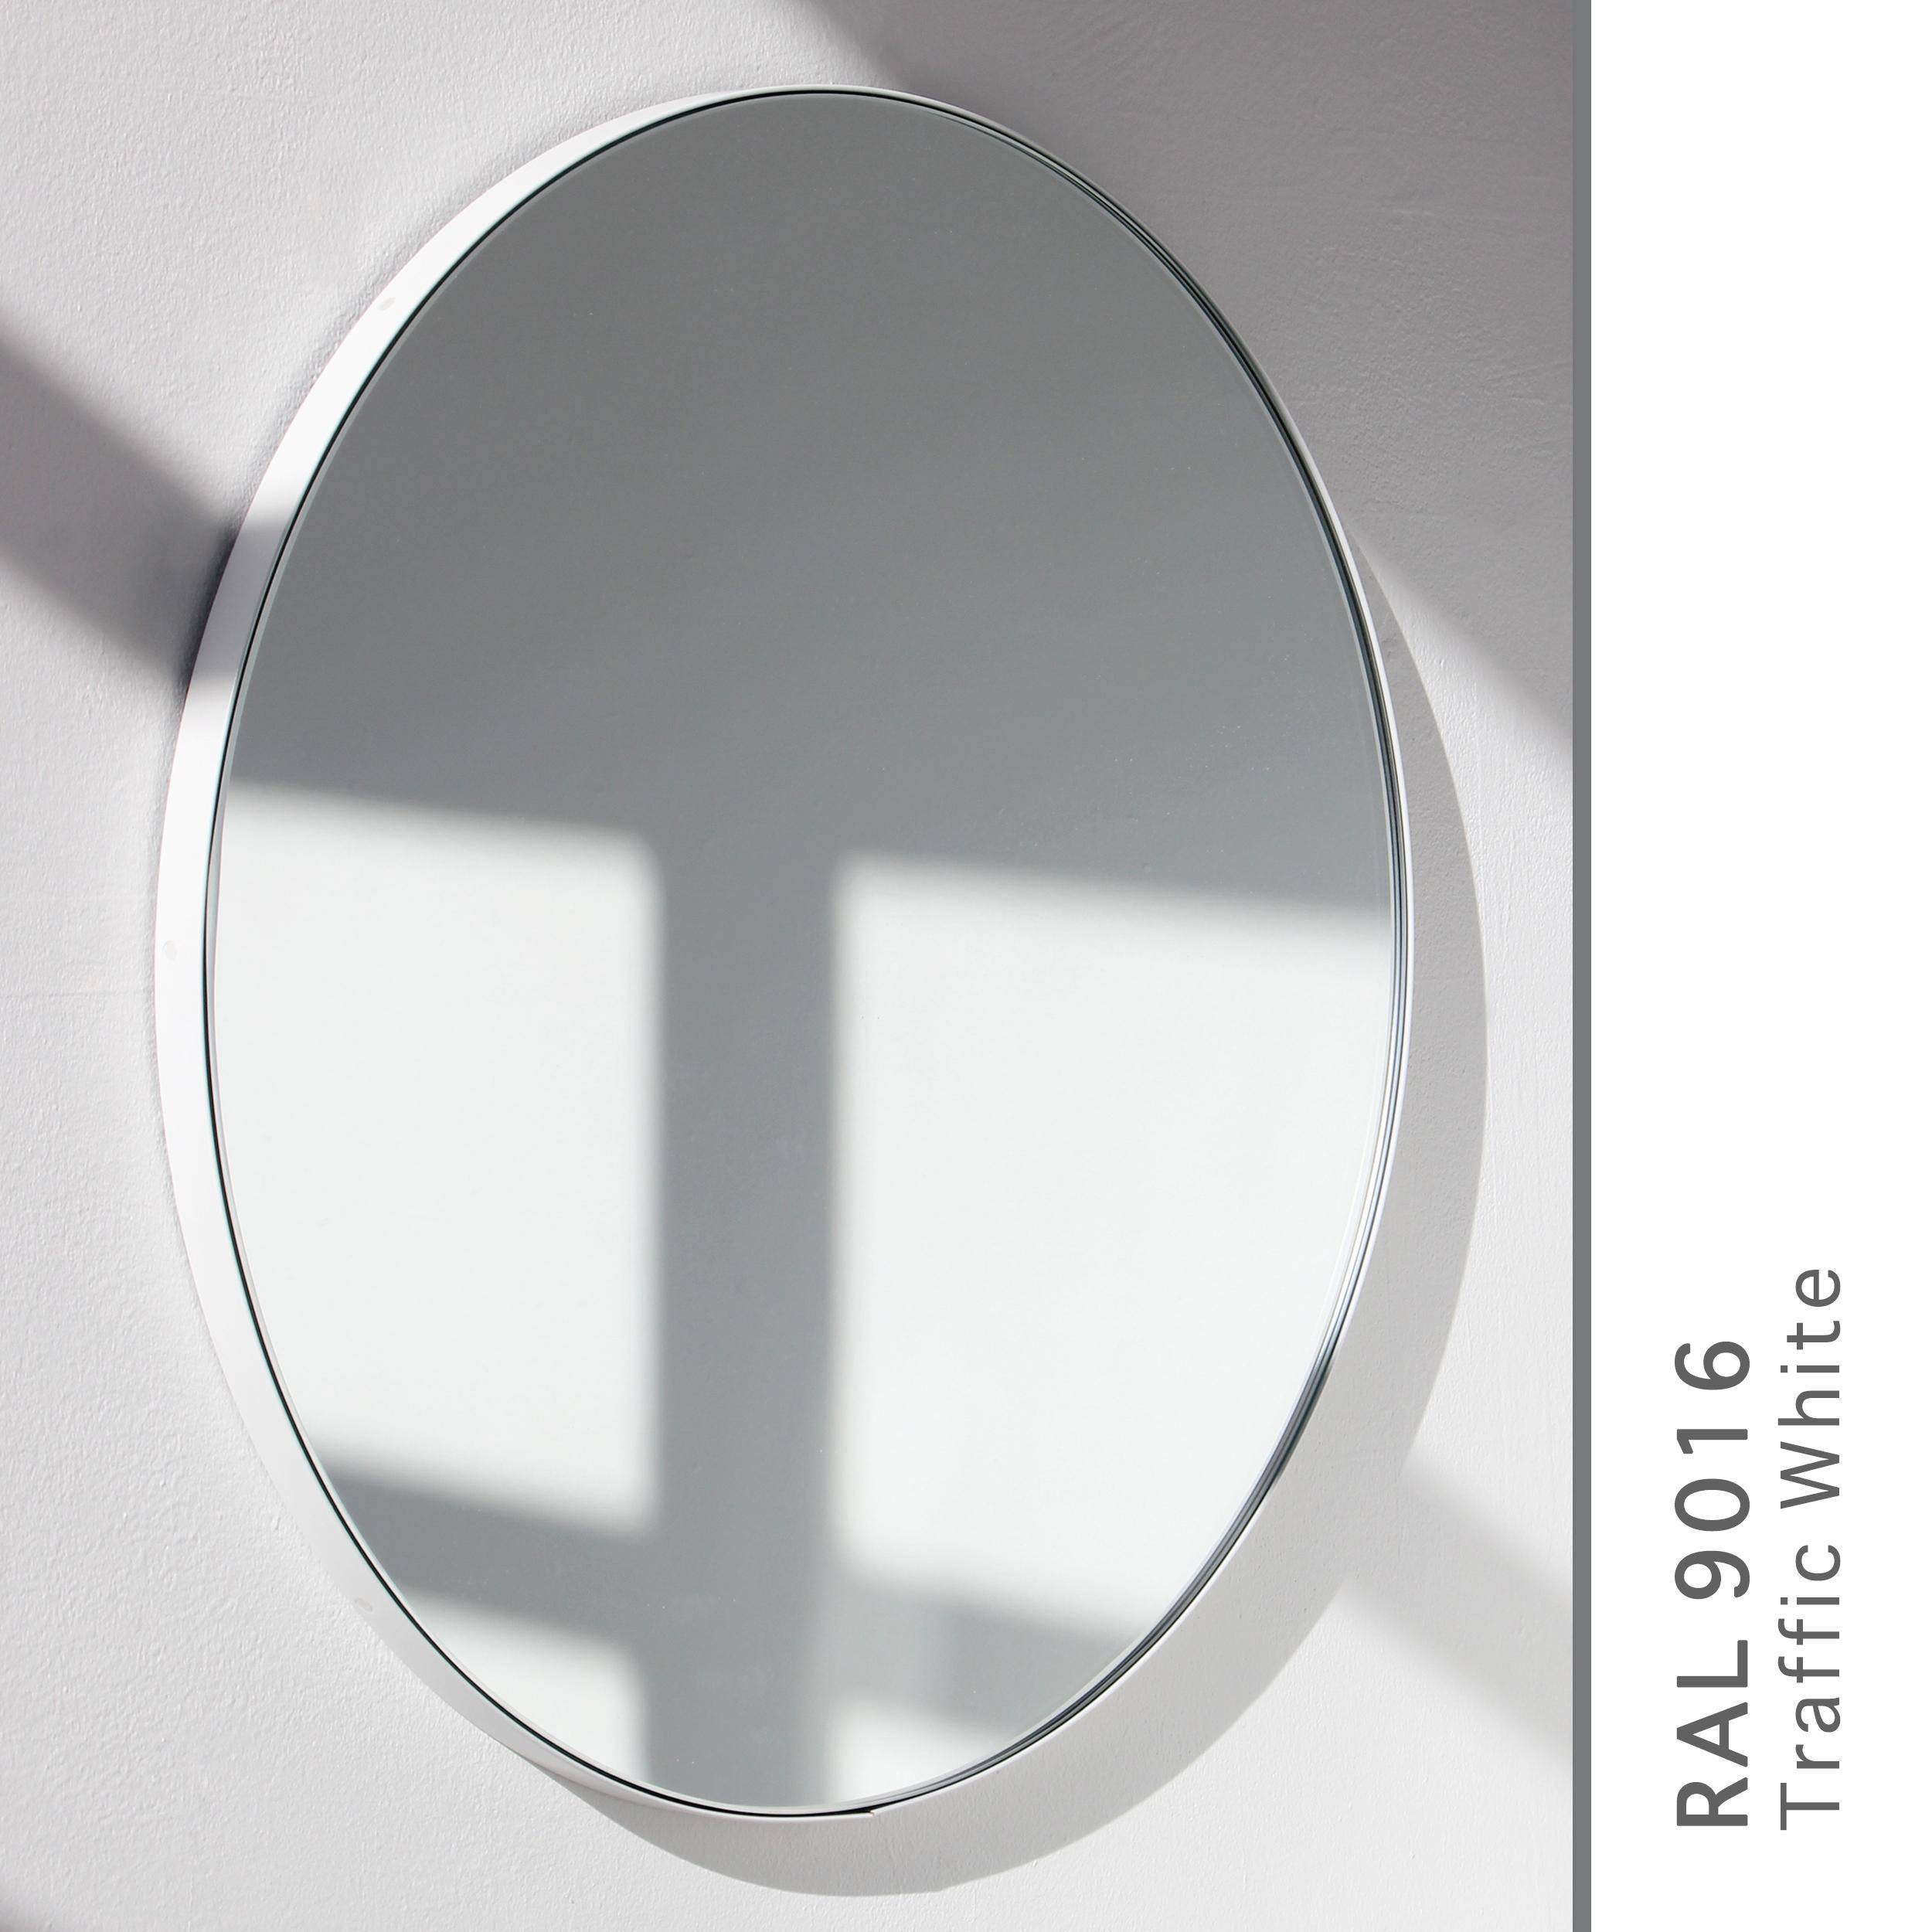 Orbis Black Tinted Bespoke Contemporary Round Mirror with White Frame - Large 4